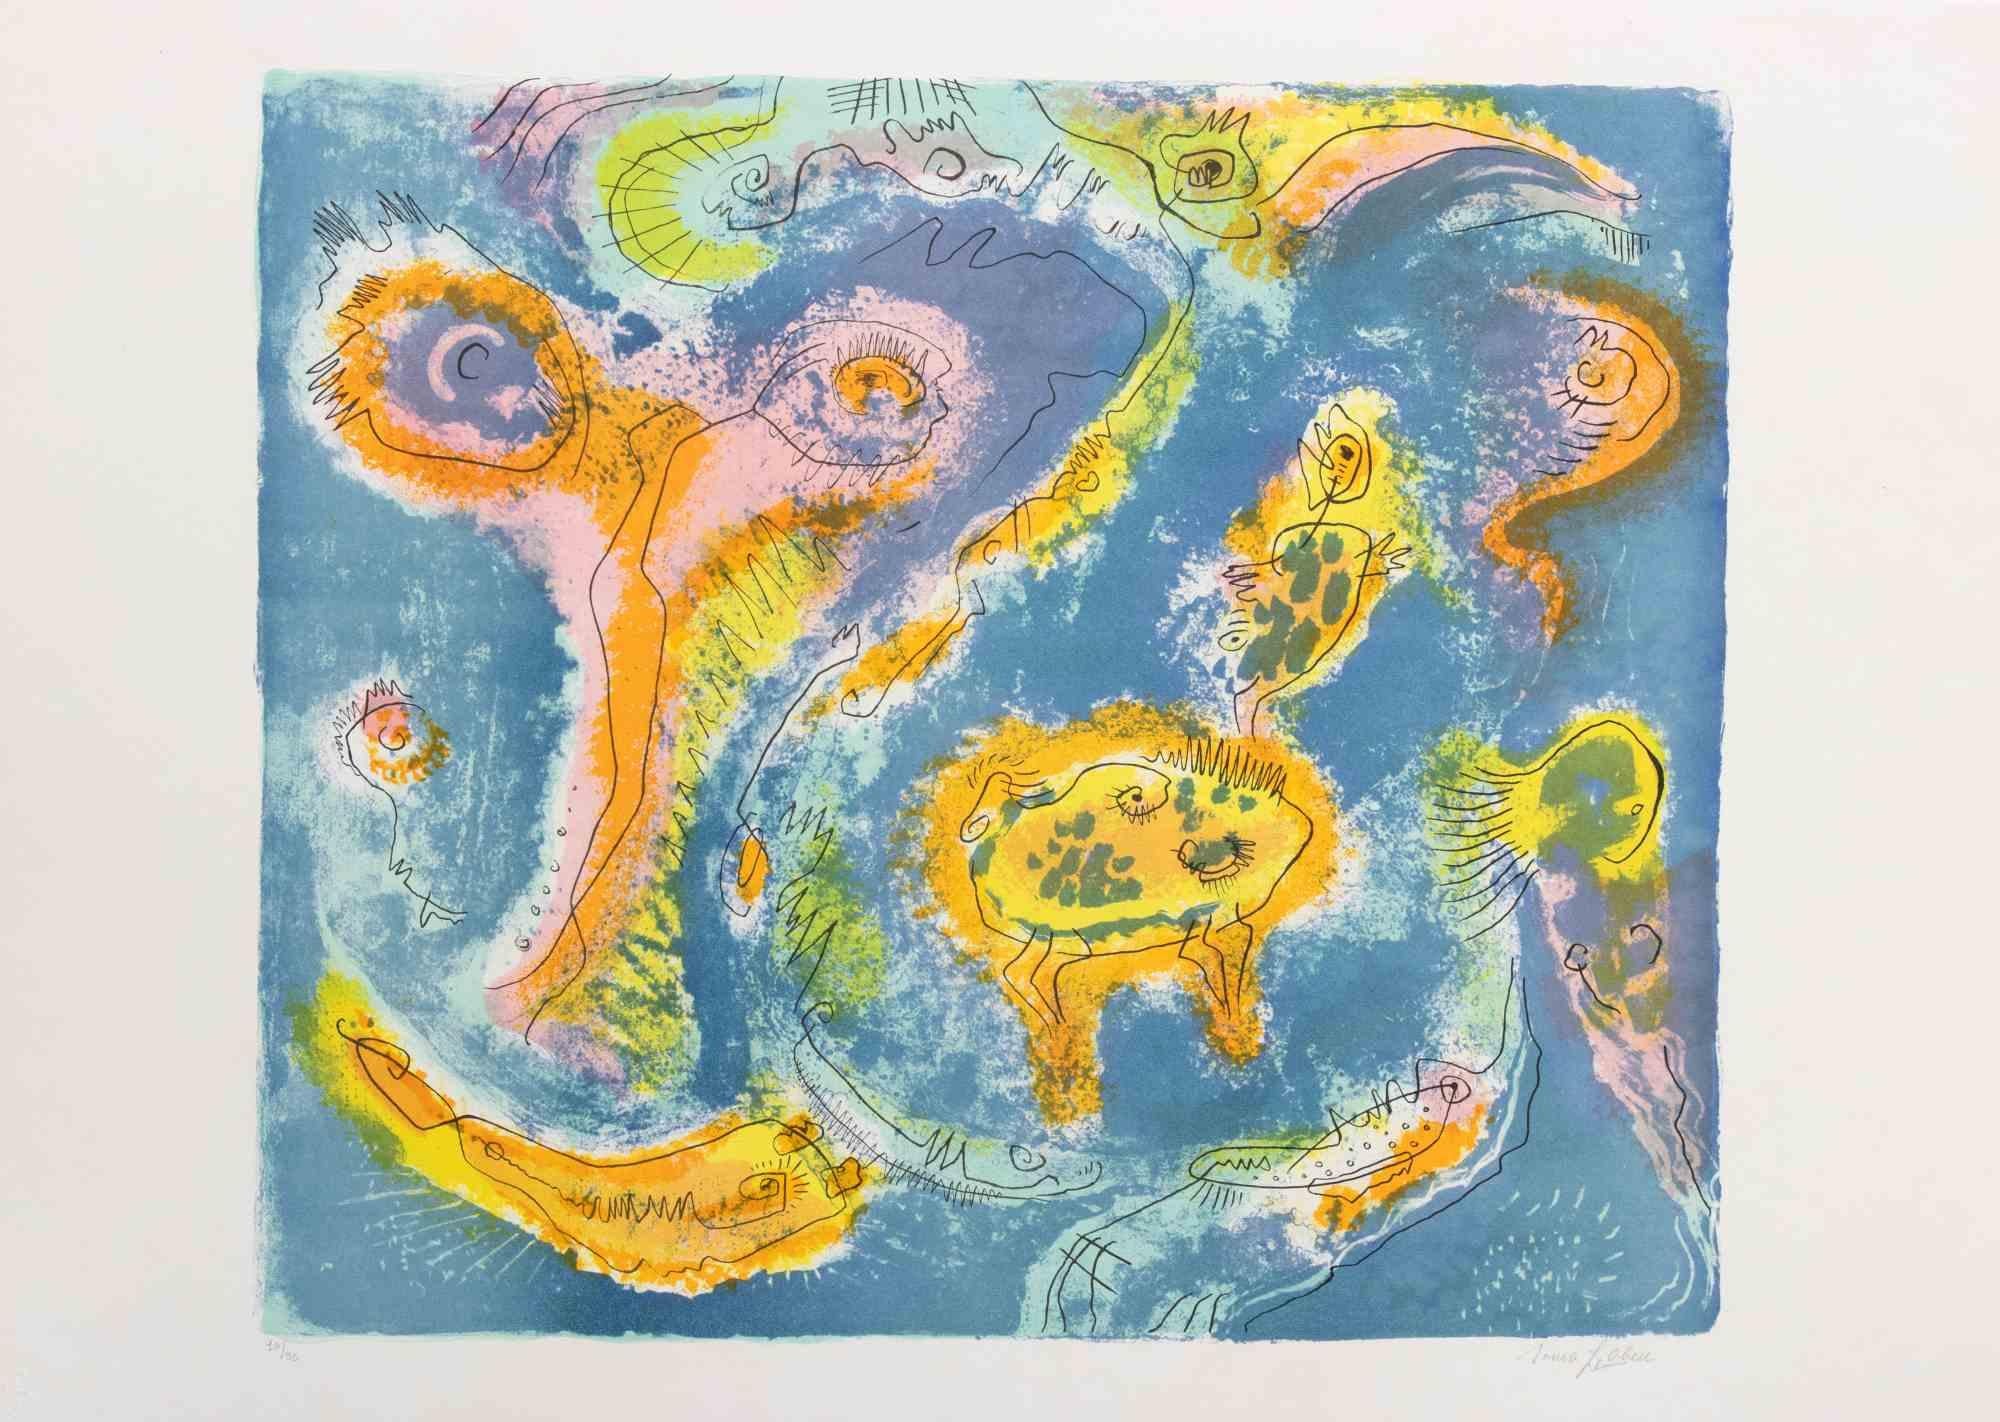 The Pond is an original contemporary artwork realized by Le Pond in 1970s.

Mixed colored lithograph.

Hand signed on the lower margin.

Numbered on the lower margin.

Edition of 10/95.